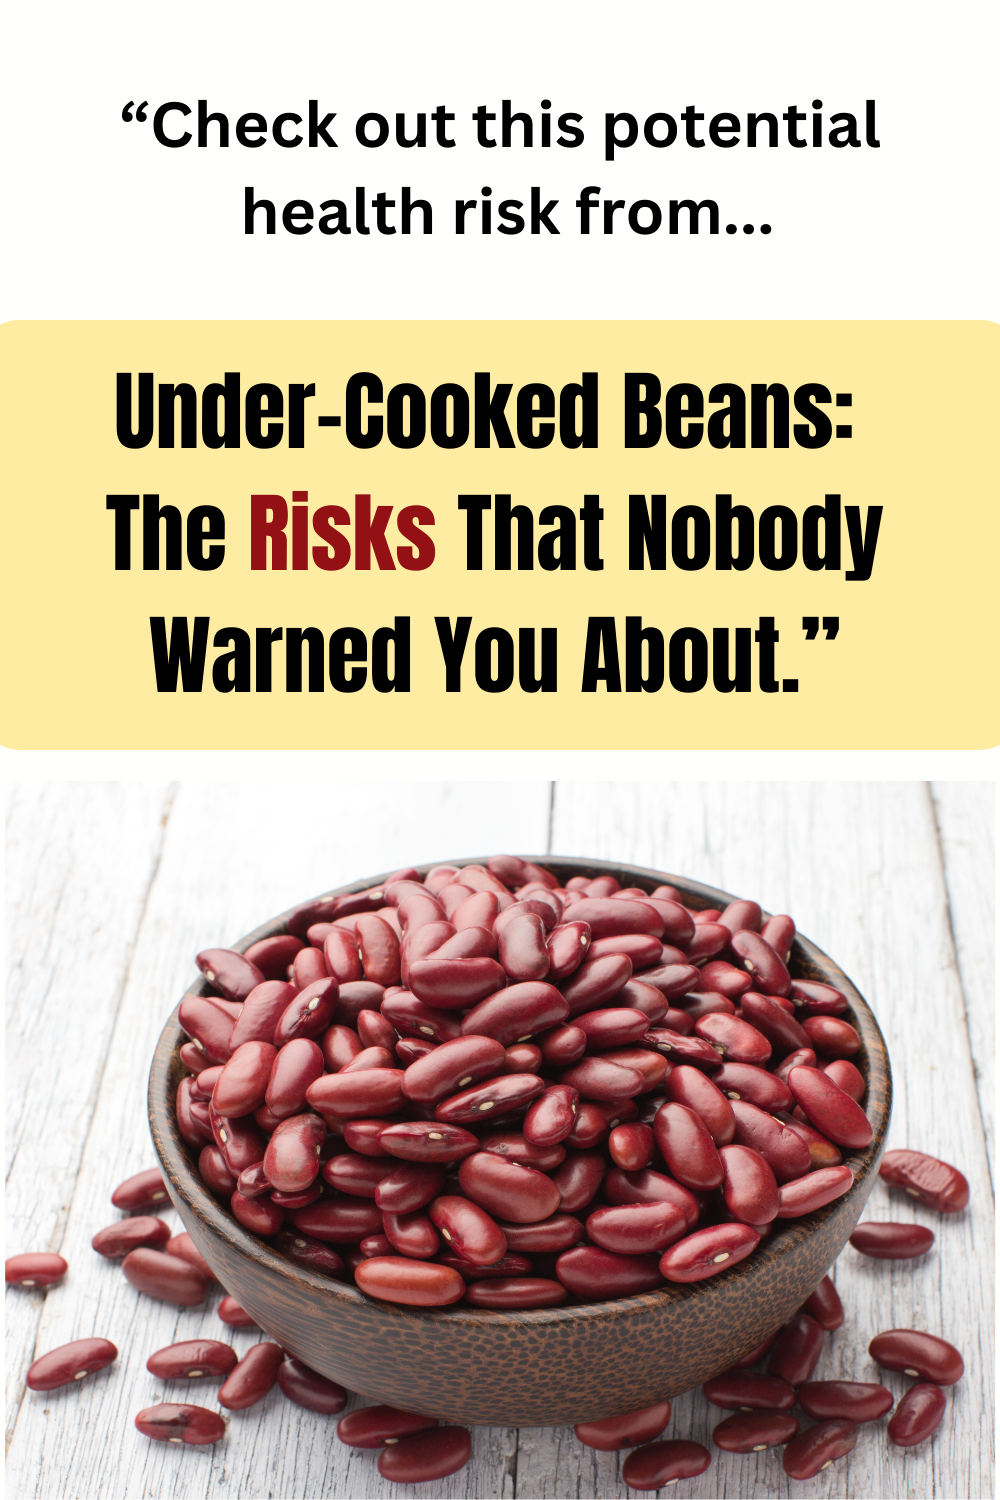 Under-Cooked Beans.